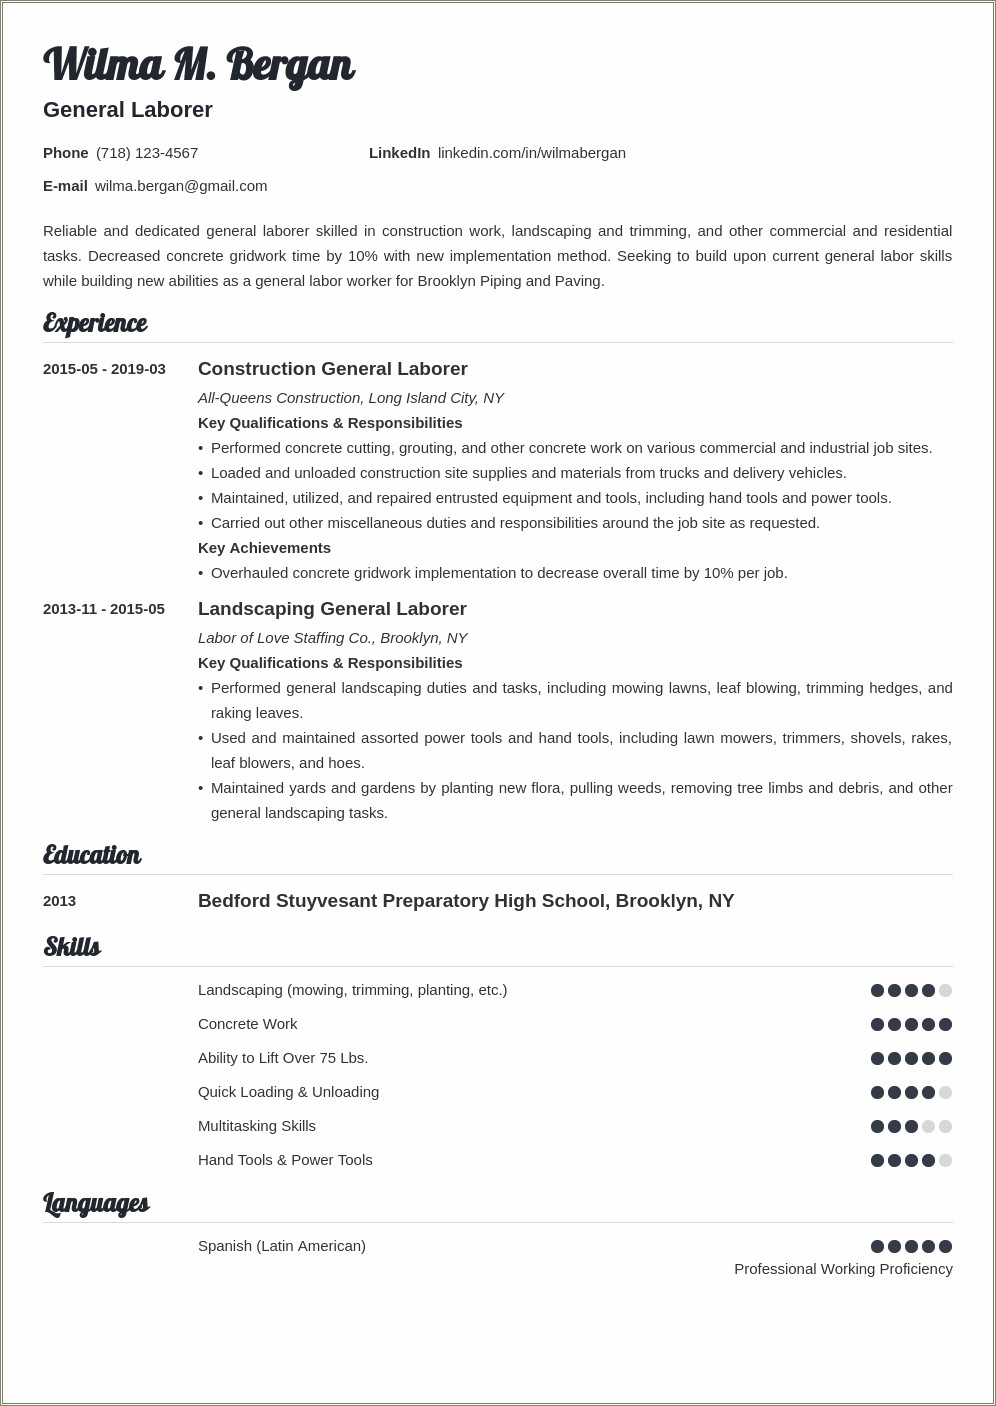 Resume Summary For A Hard Worker